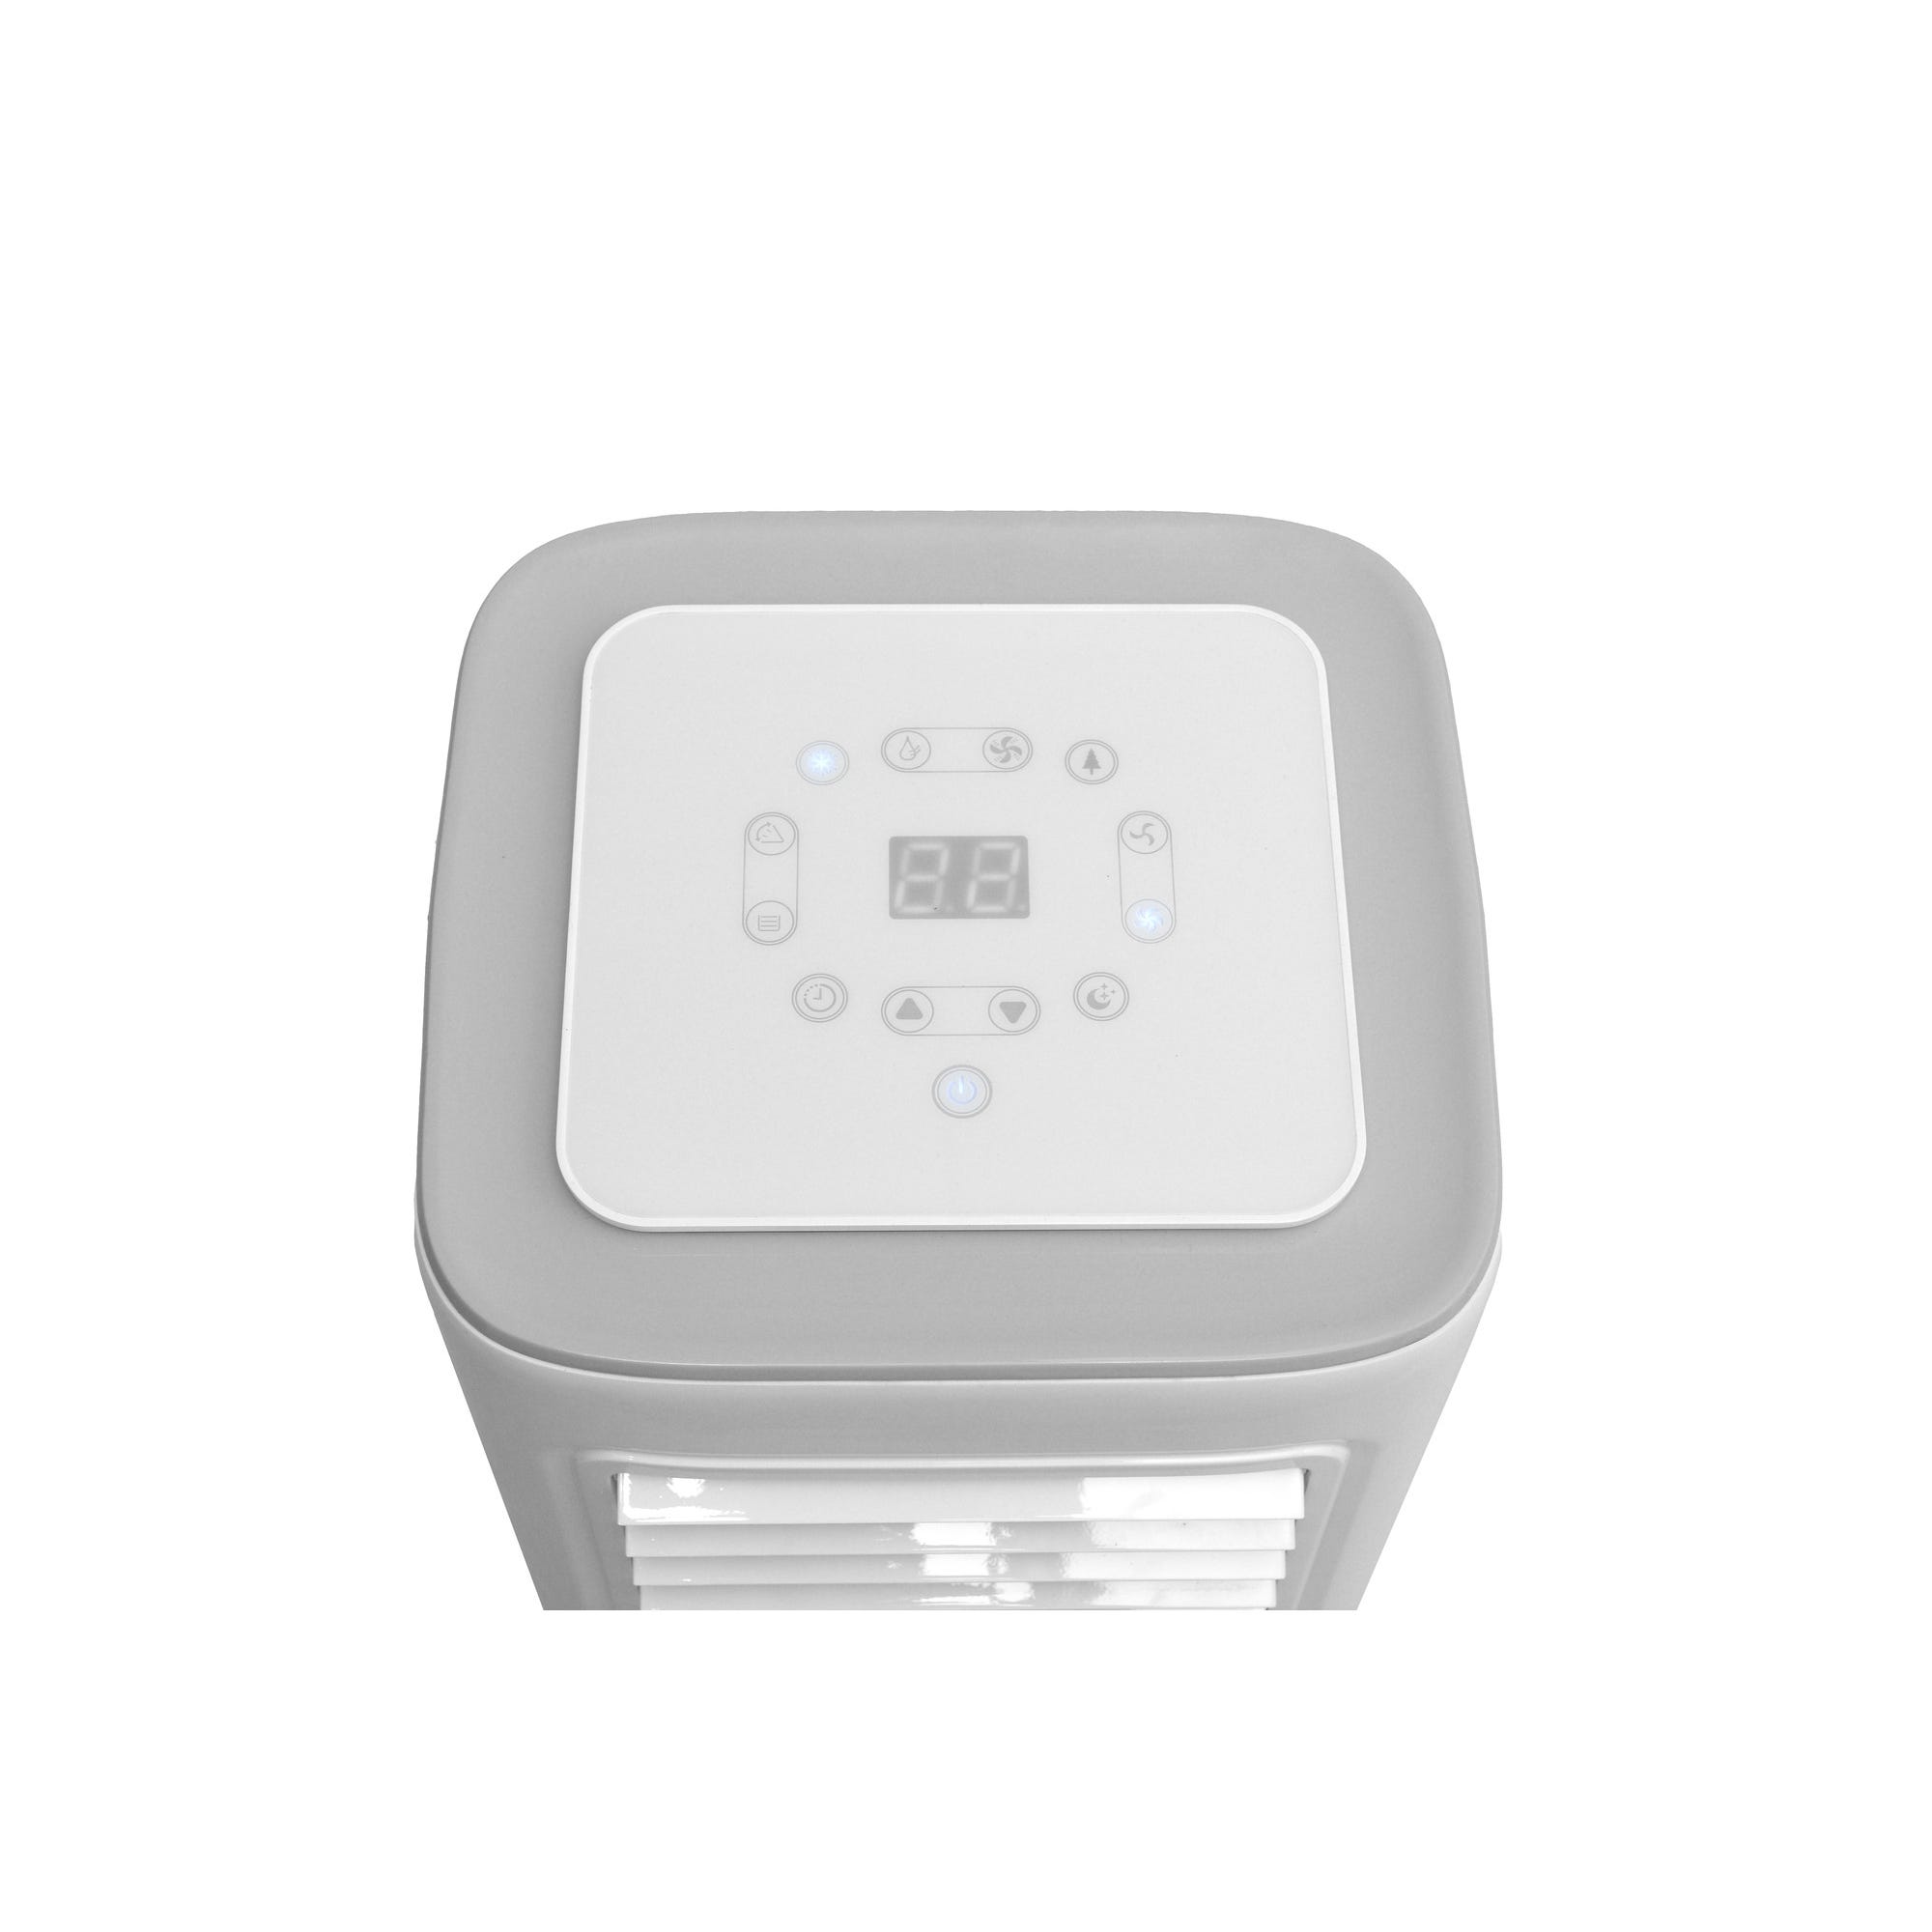 Climatisateur mobile froid seul 2000W - OPC A01 070 OPTIMEO  0